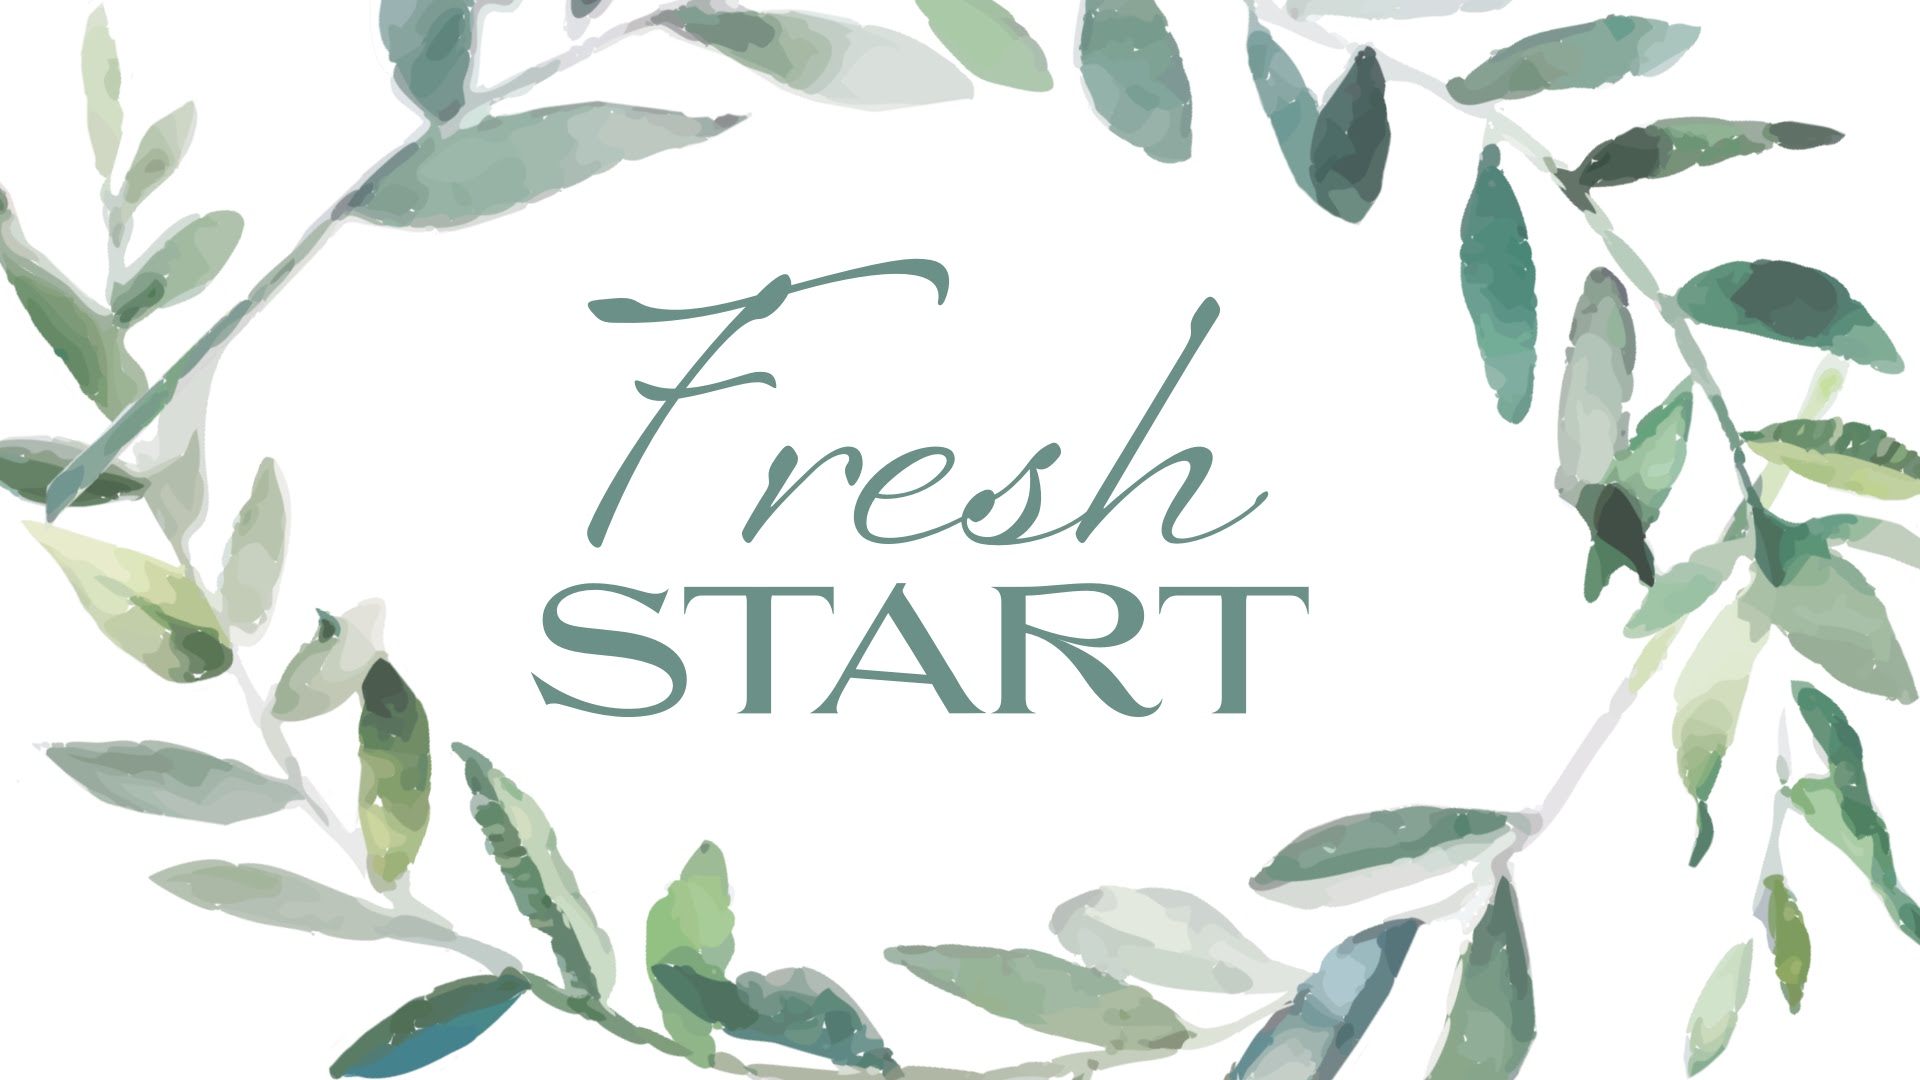 We can’t start over. But we can start fresh. Step into the New Year by examining and embracing the “fresh start” God offers us over and over again.